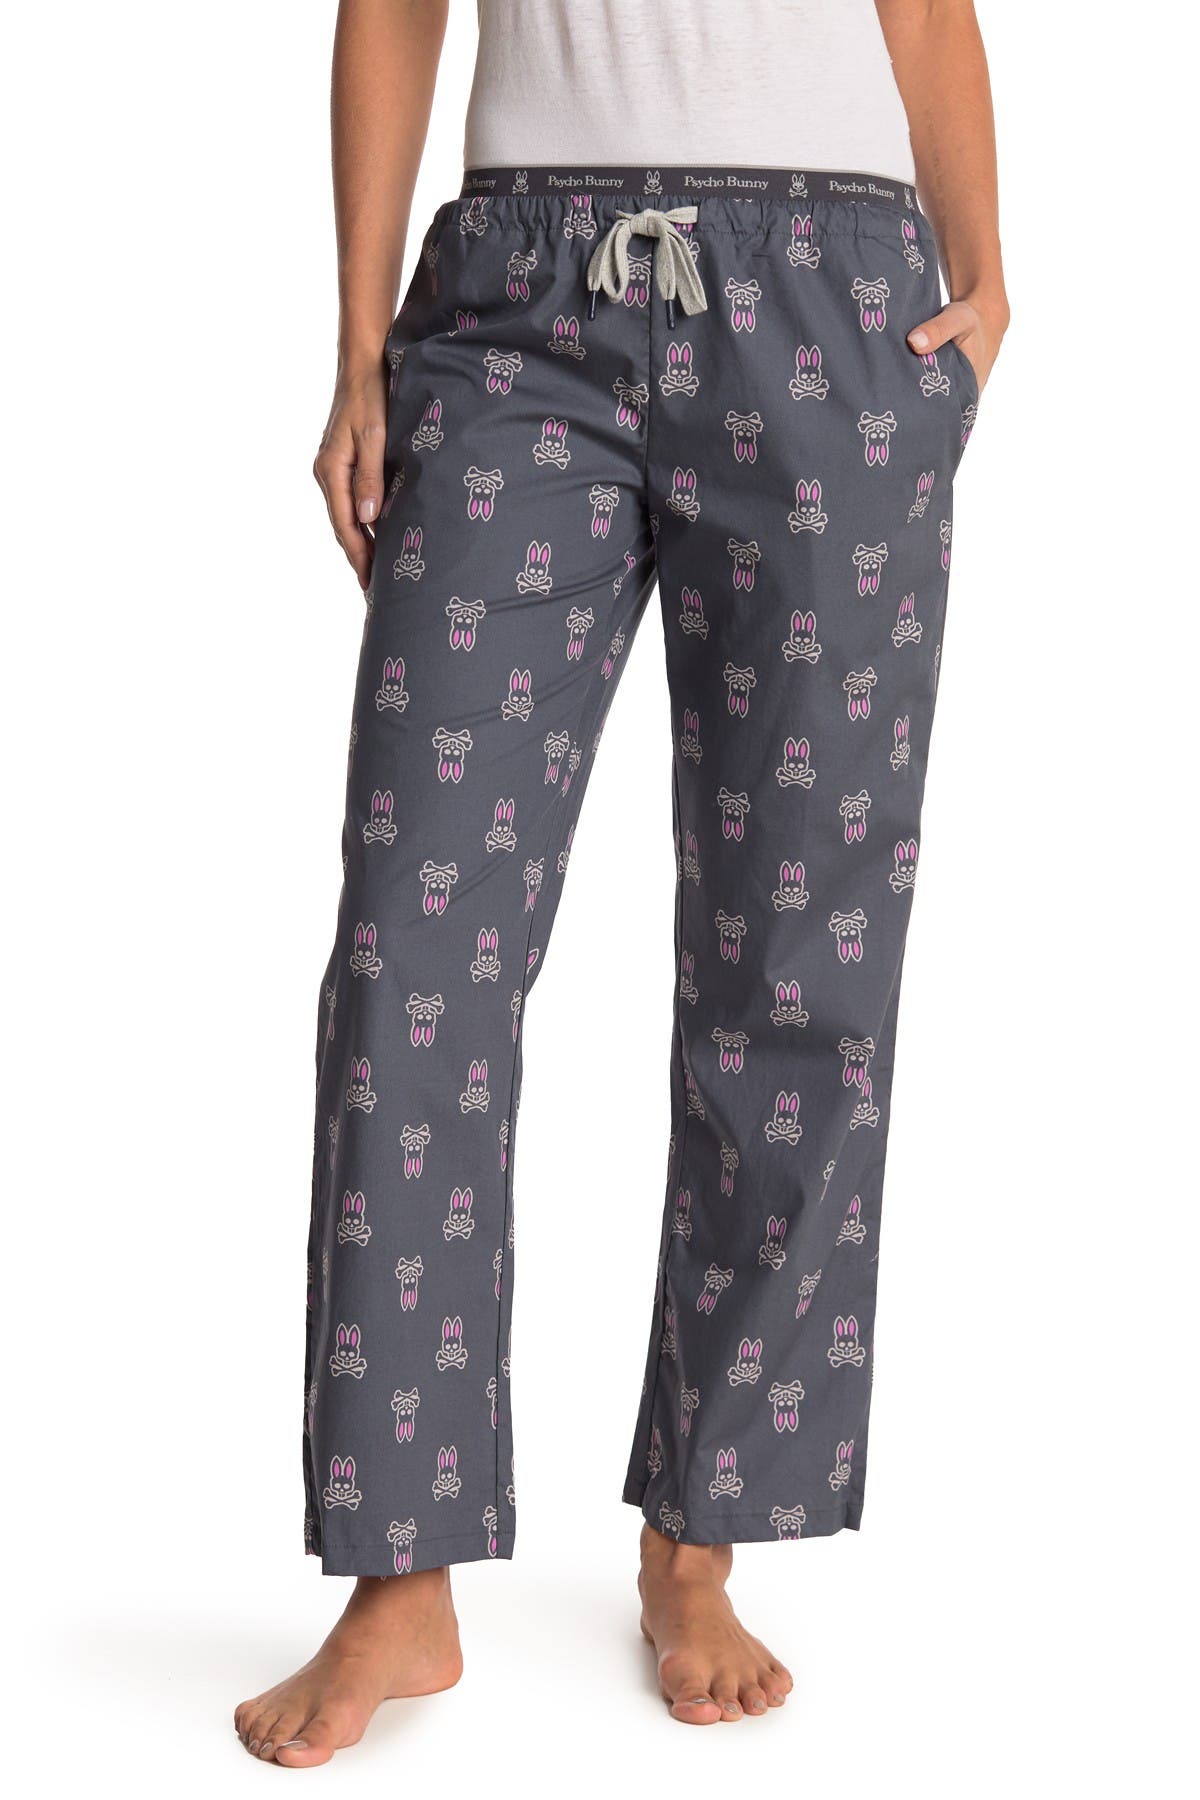 Psycho Bunny Women's Black Sand Tossed All Over Bunny Lounge Pants 